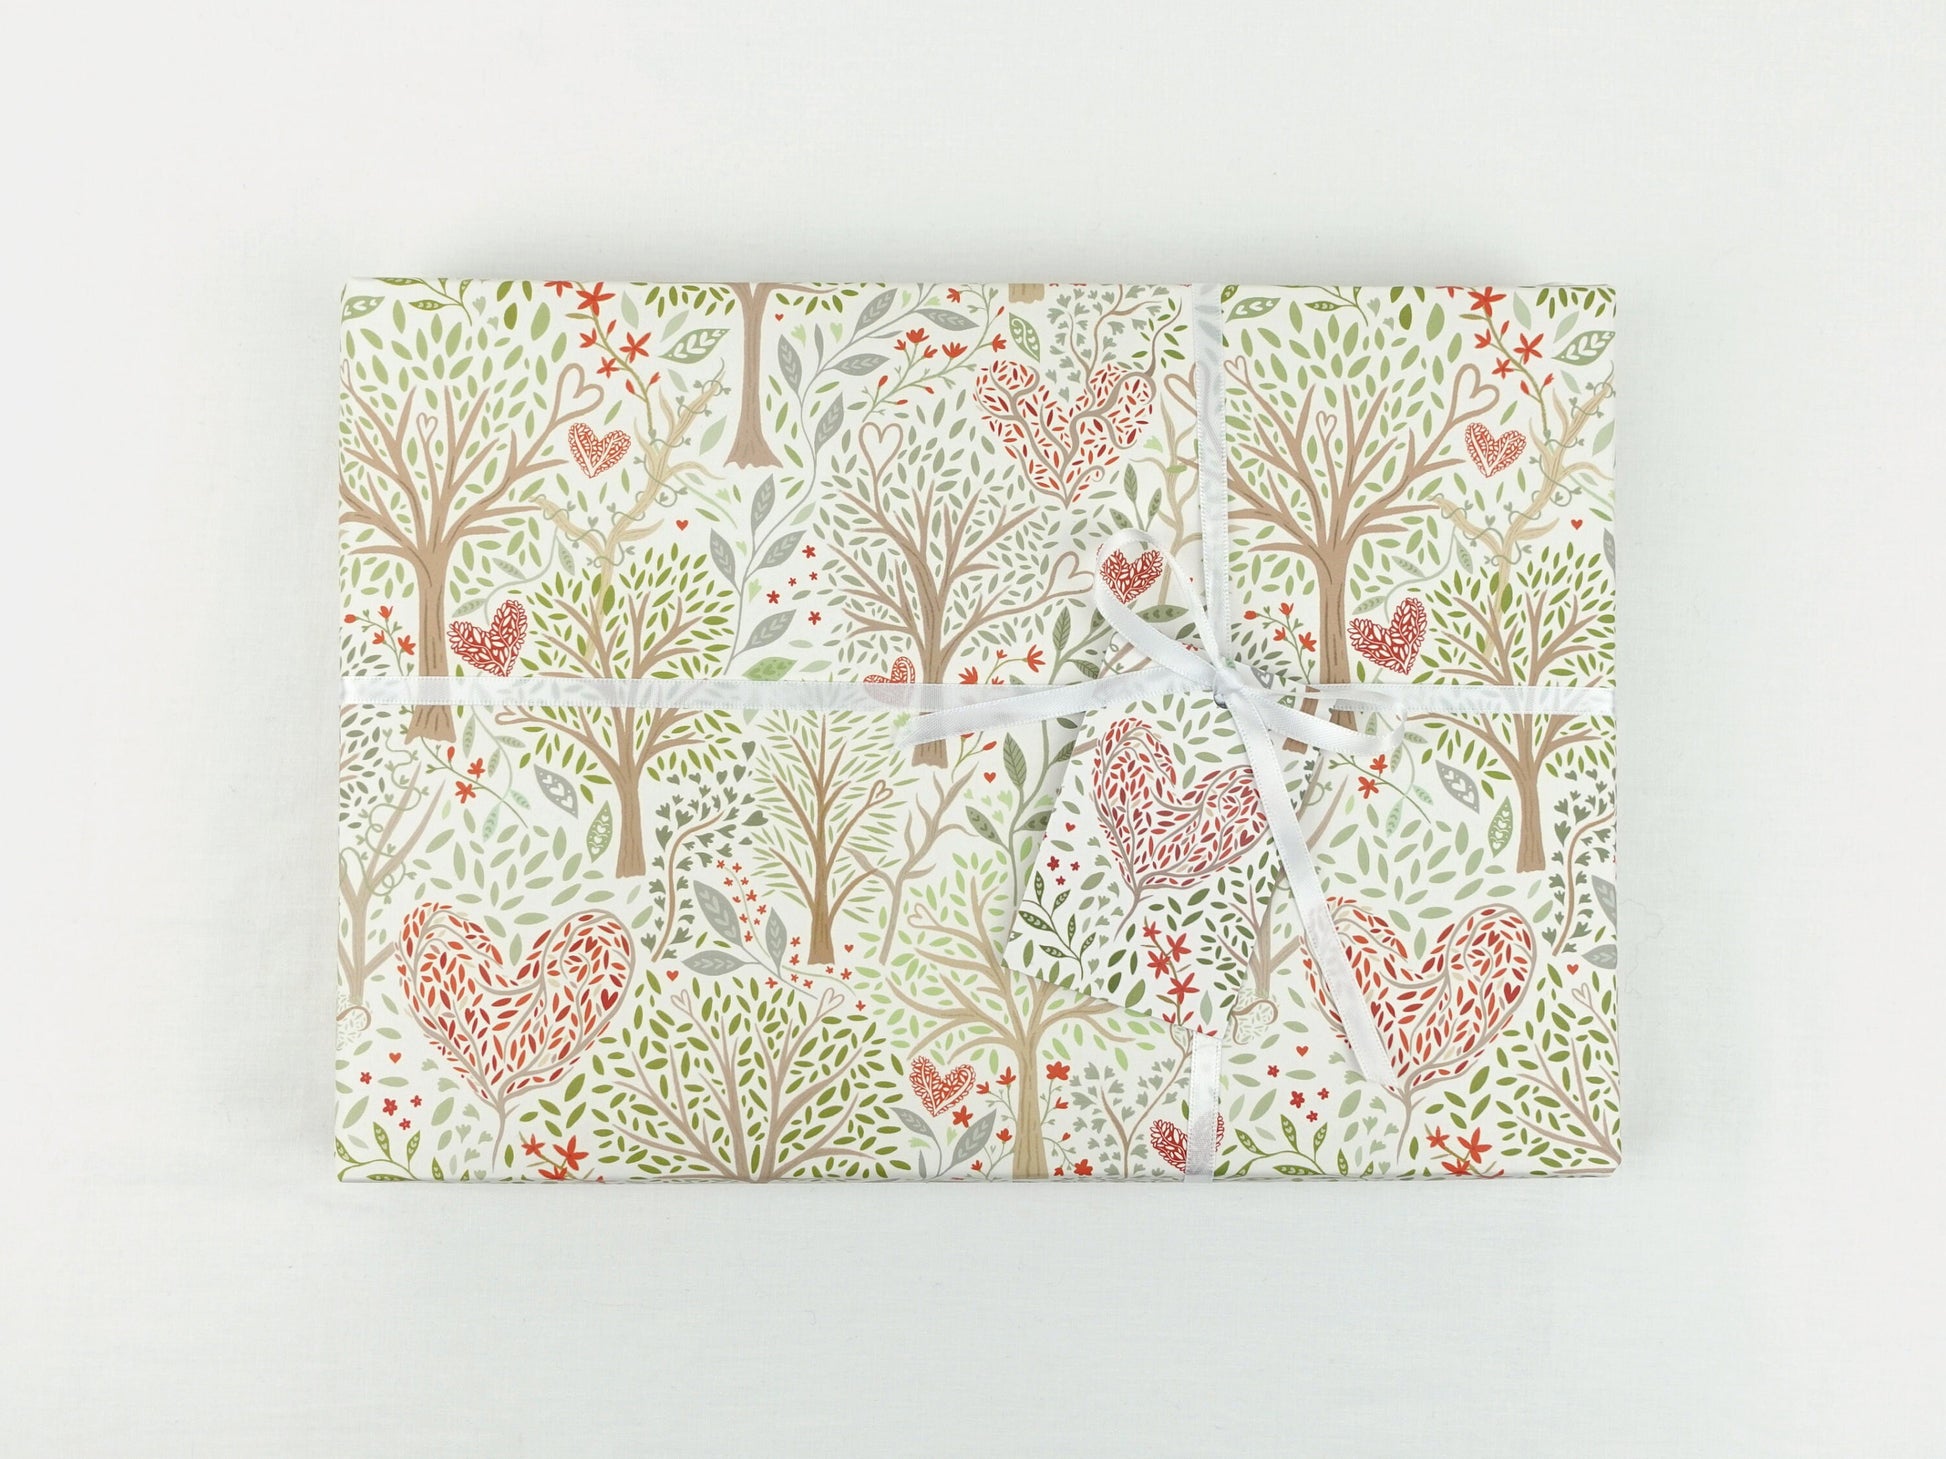 Wedding wrapping paper | Heart woodland design | Anniversary eco friendly gift wrap | Premium sheets + Tags | Zero plastic packaging 70x50cm